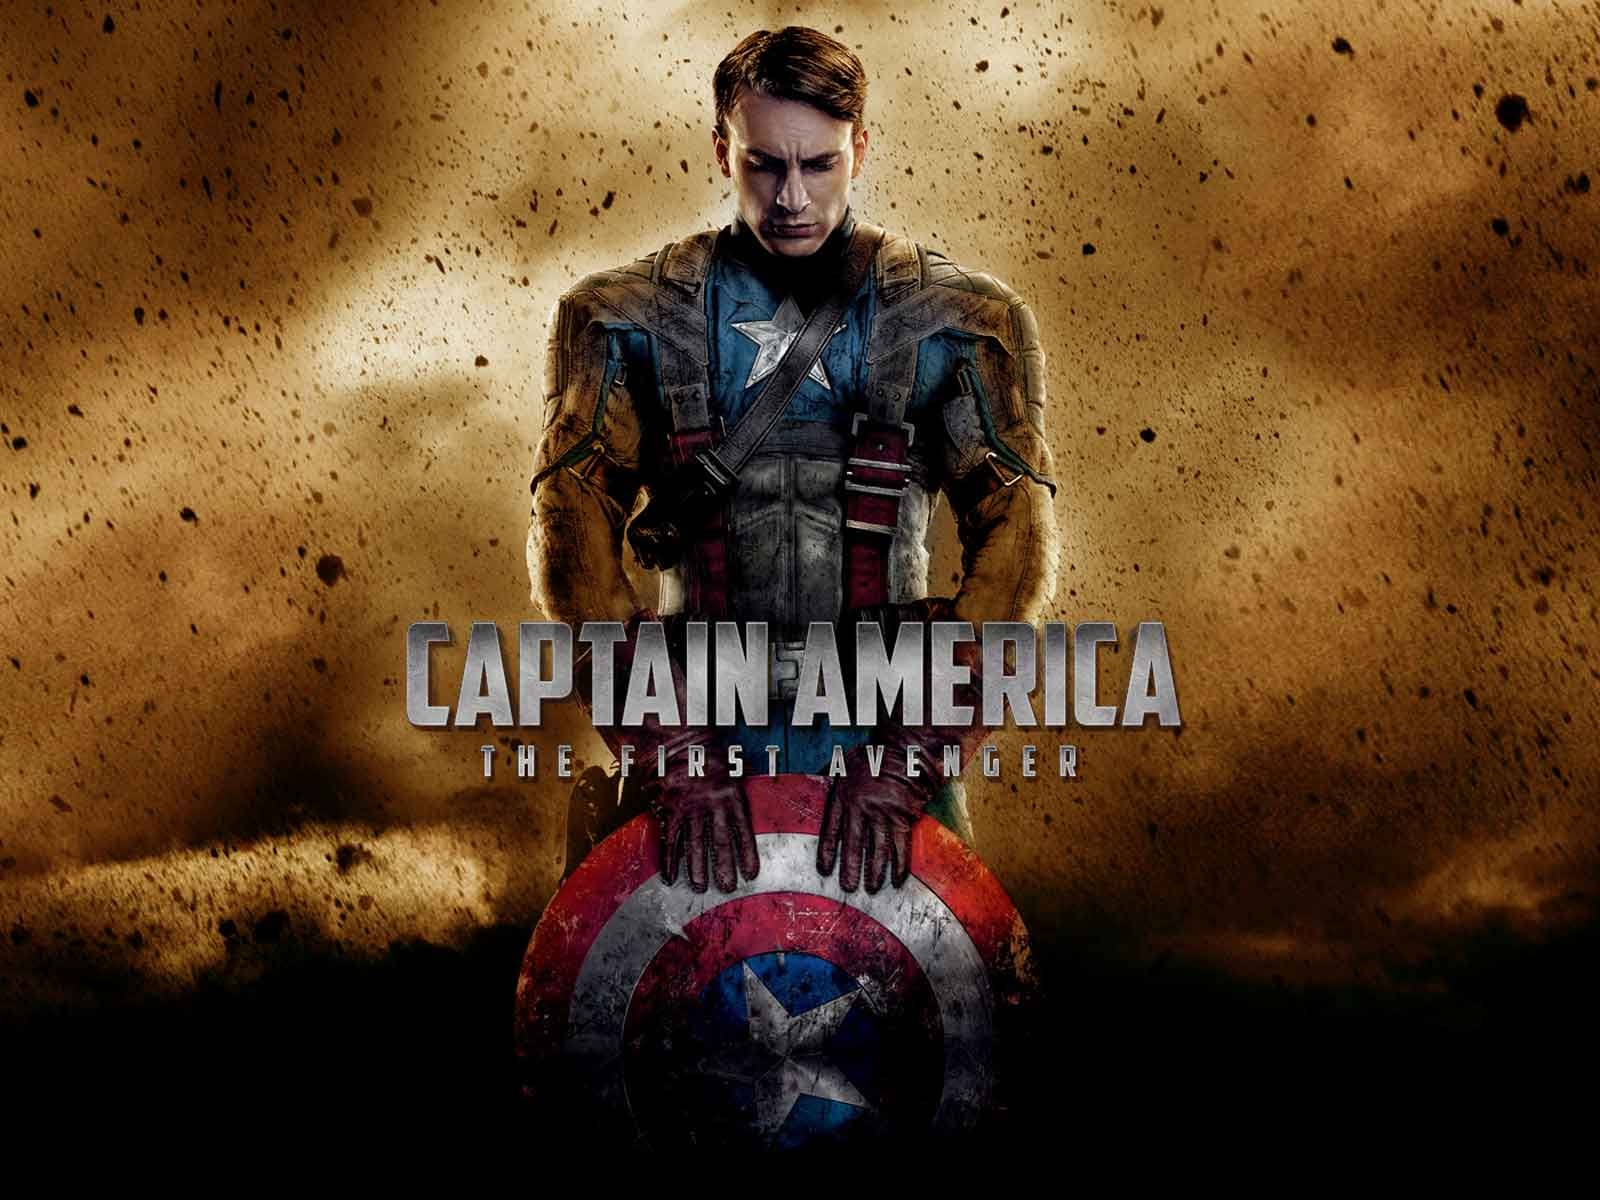 Captain America: The First Avenger wallpapers HD #7 - 1600x1200